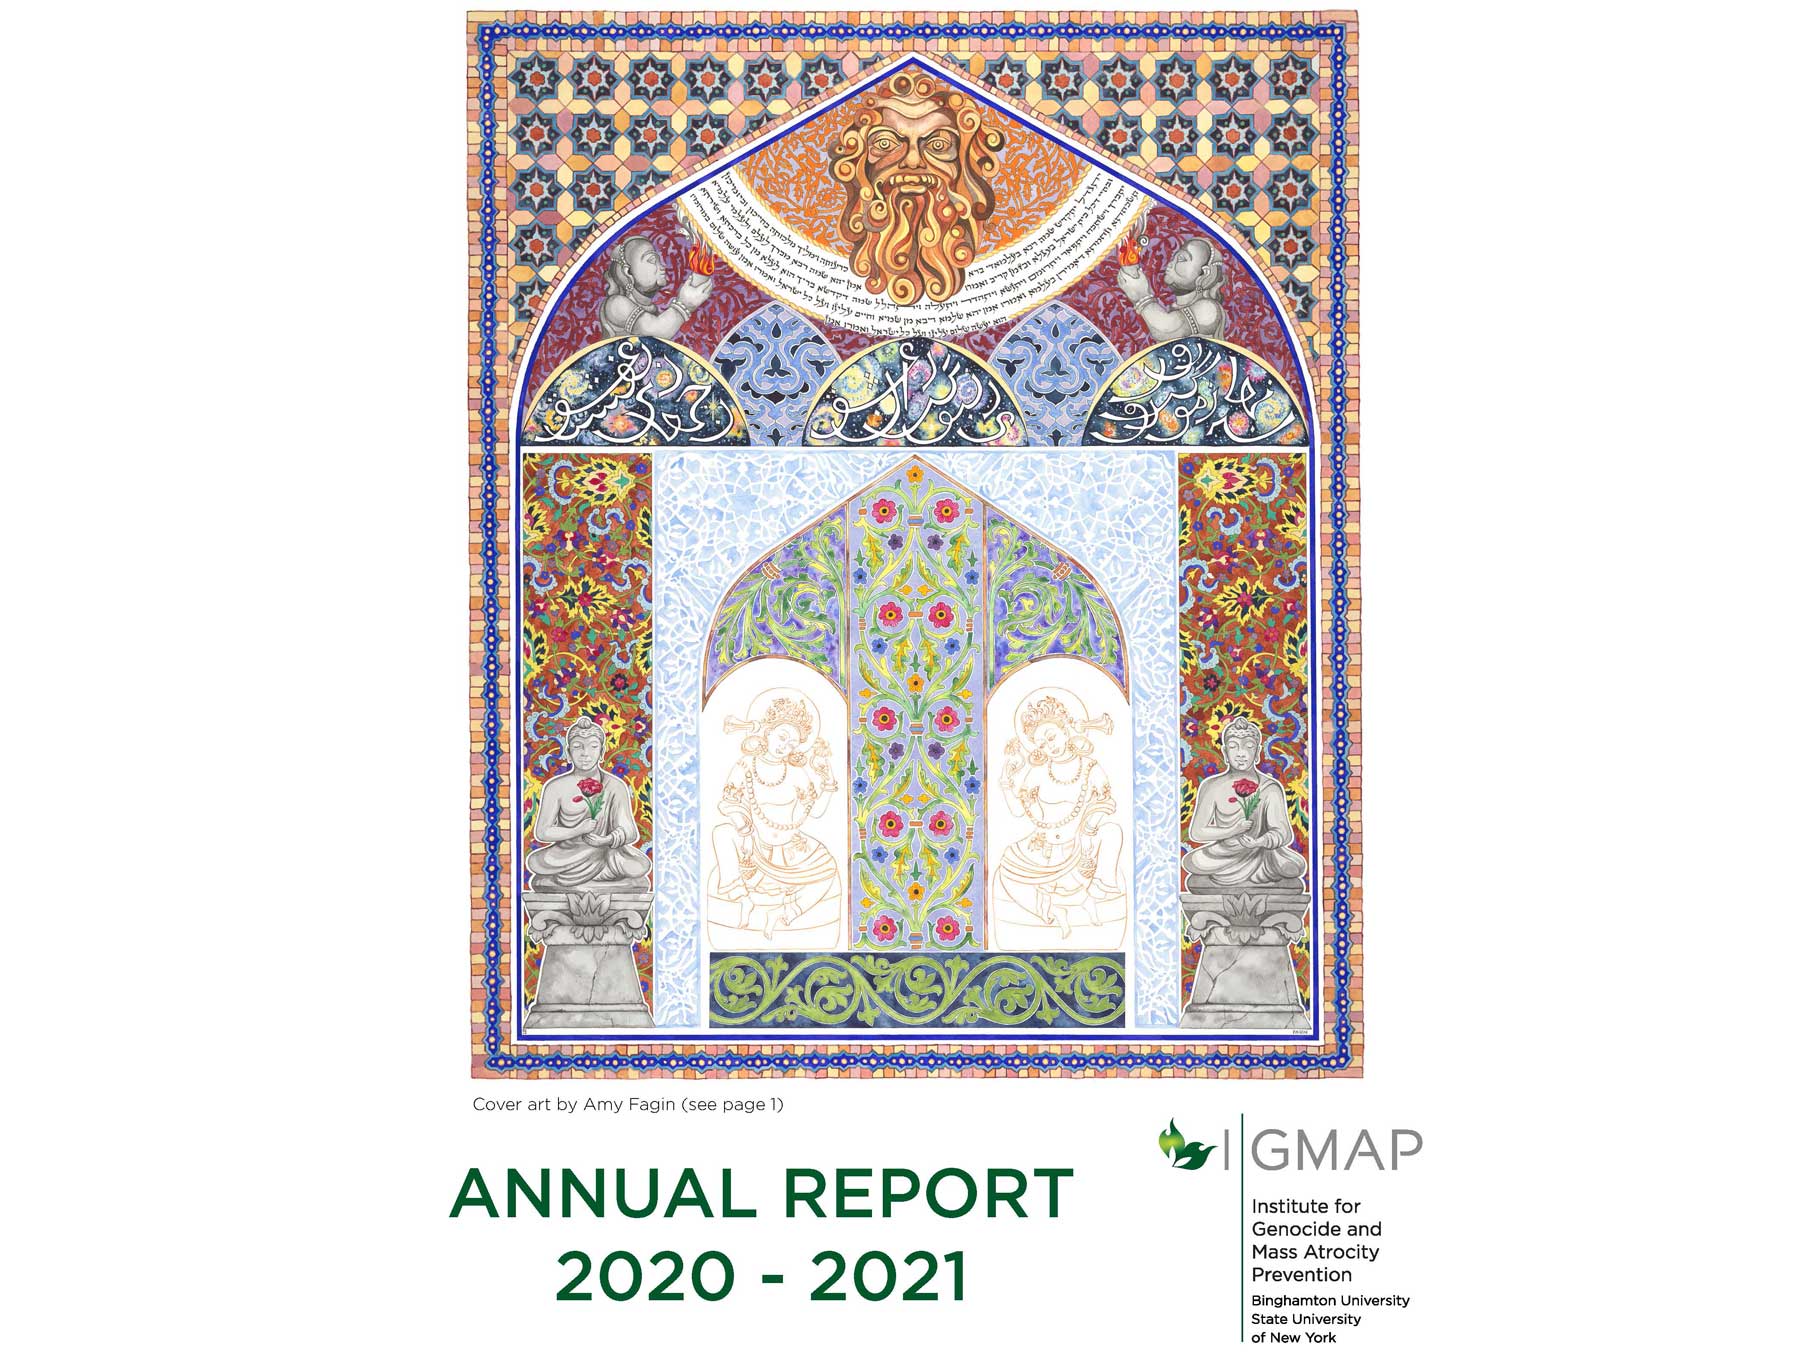 2020-2021 Annual Report cover design with artwork